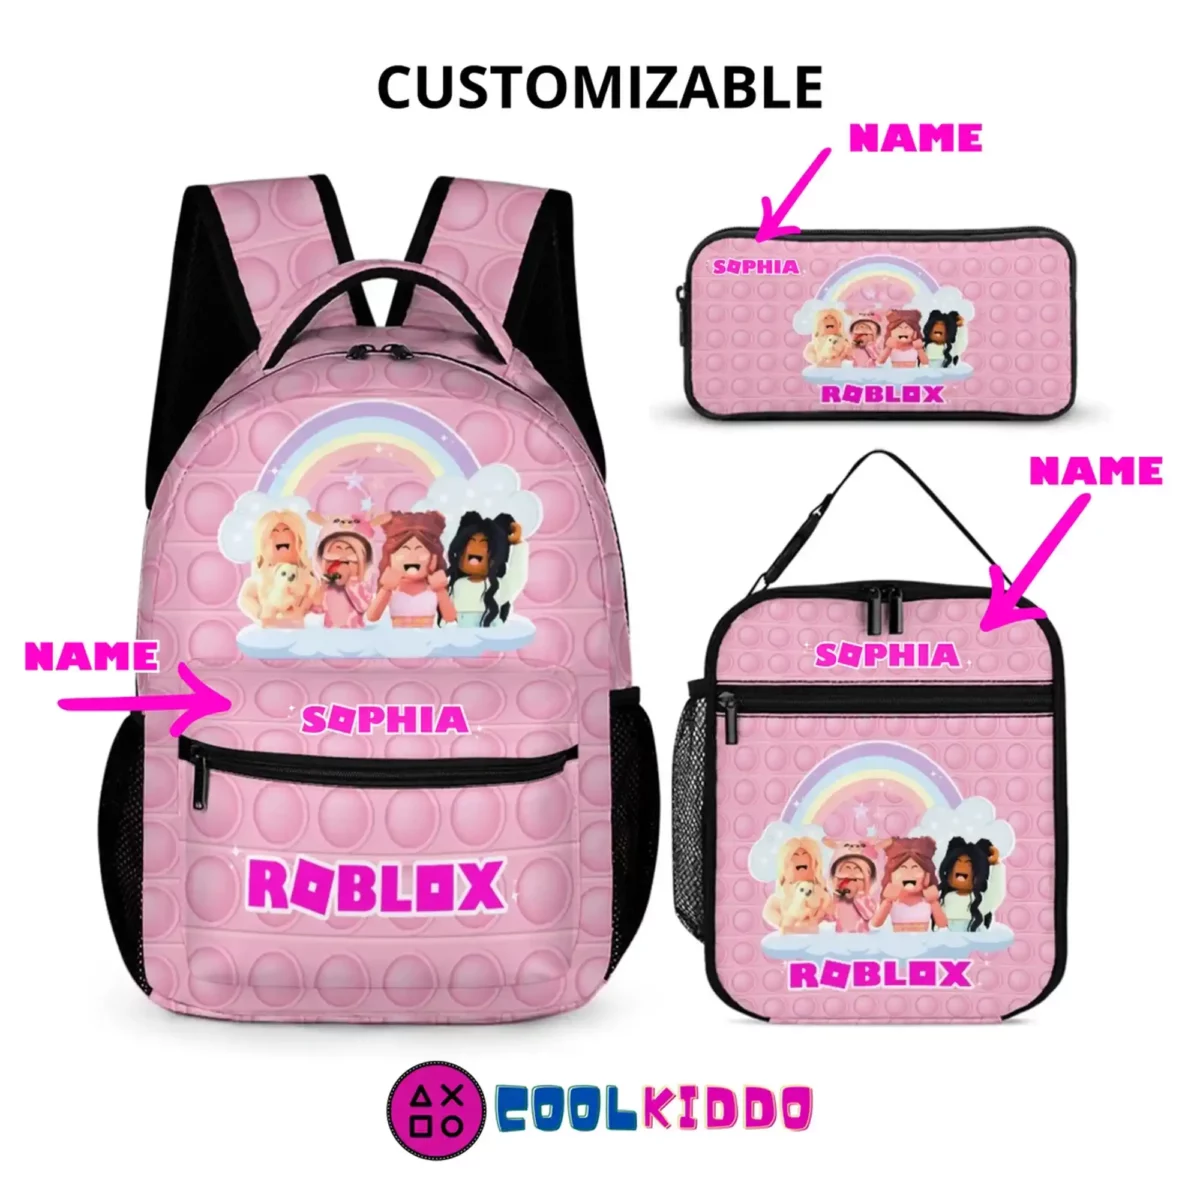 Personalized Roblox Pink Backpack for Girls – Three-Piece Set: Backpack, Lunch Bag, and Pencil Case Cool Kiddo 12